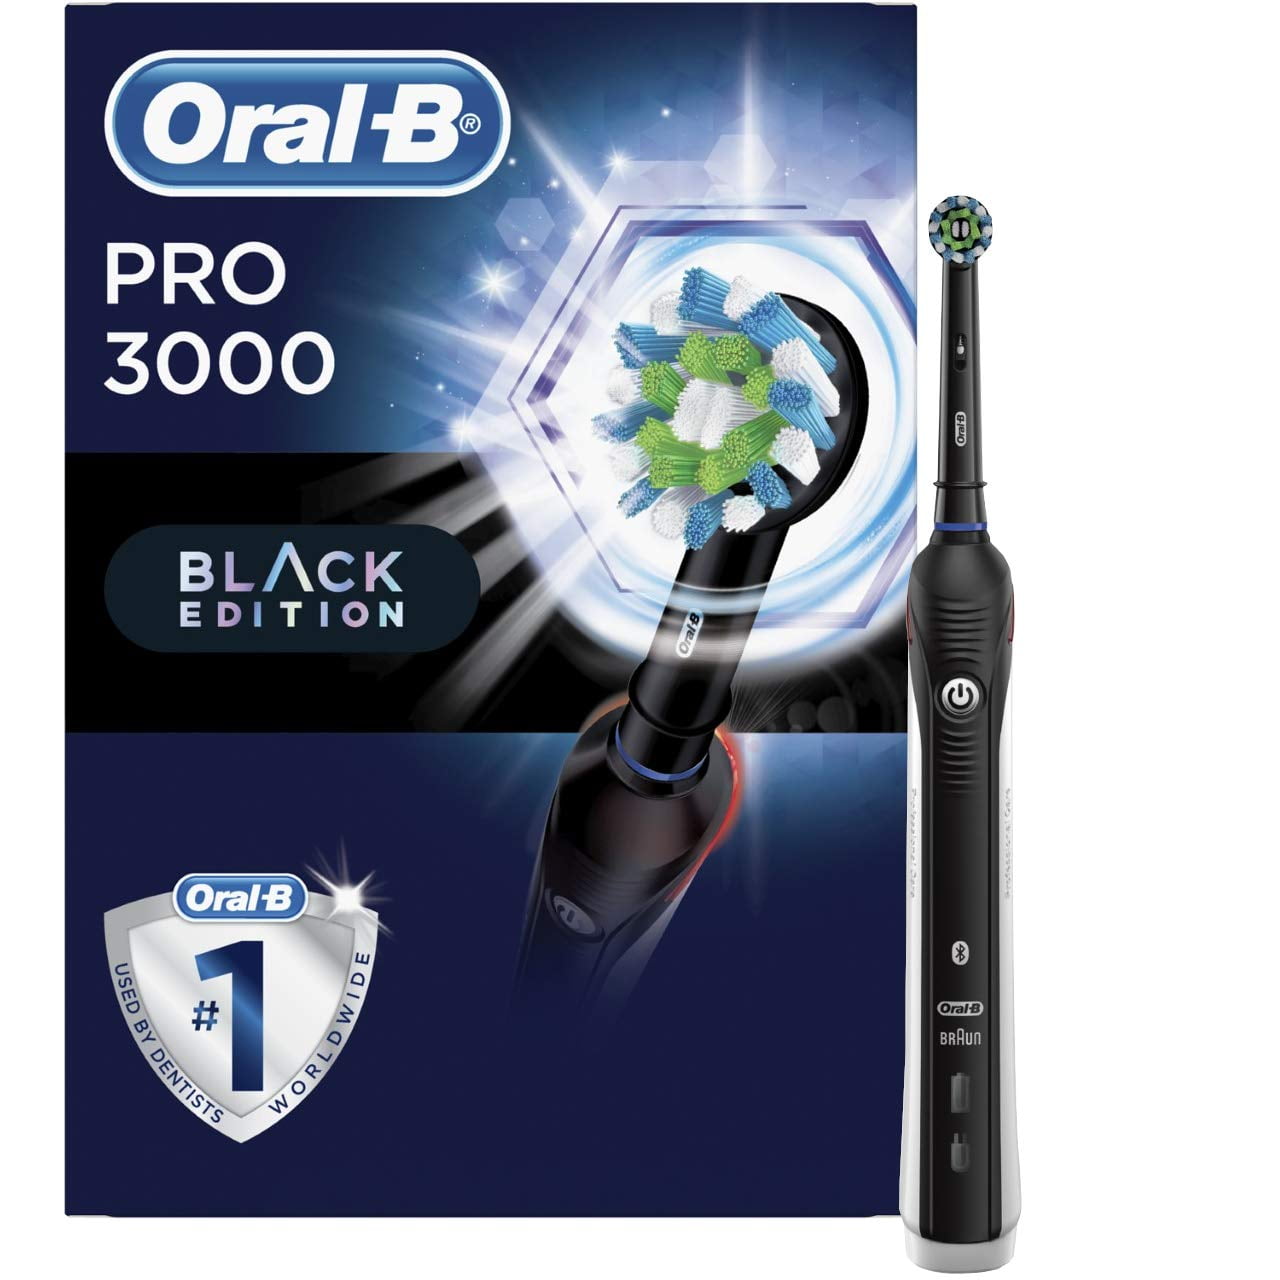 Economisch cement boeren Oral-B 3000 Smartseries Electric Toothbrush with Bluetooth Connectivity,  Black Edition, Powered by Braun - Walmart.com